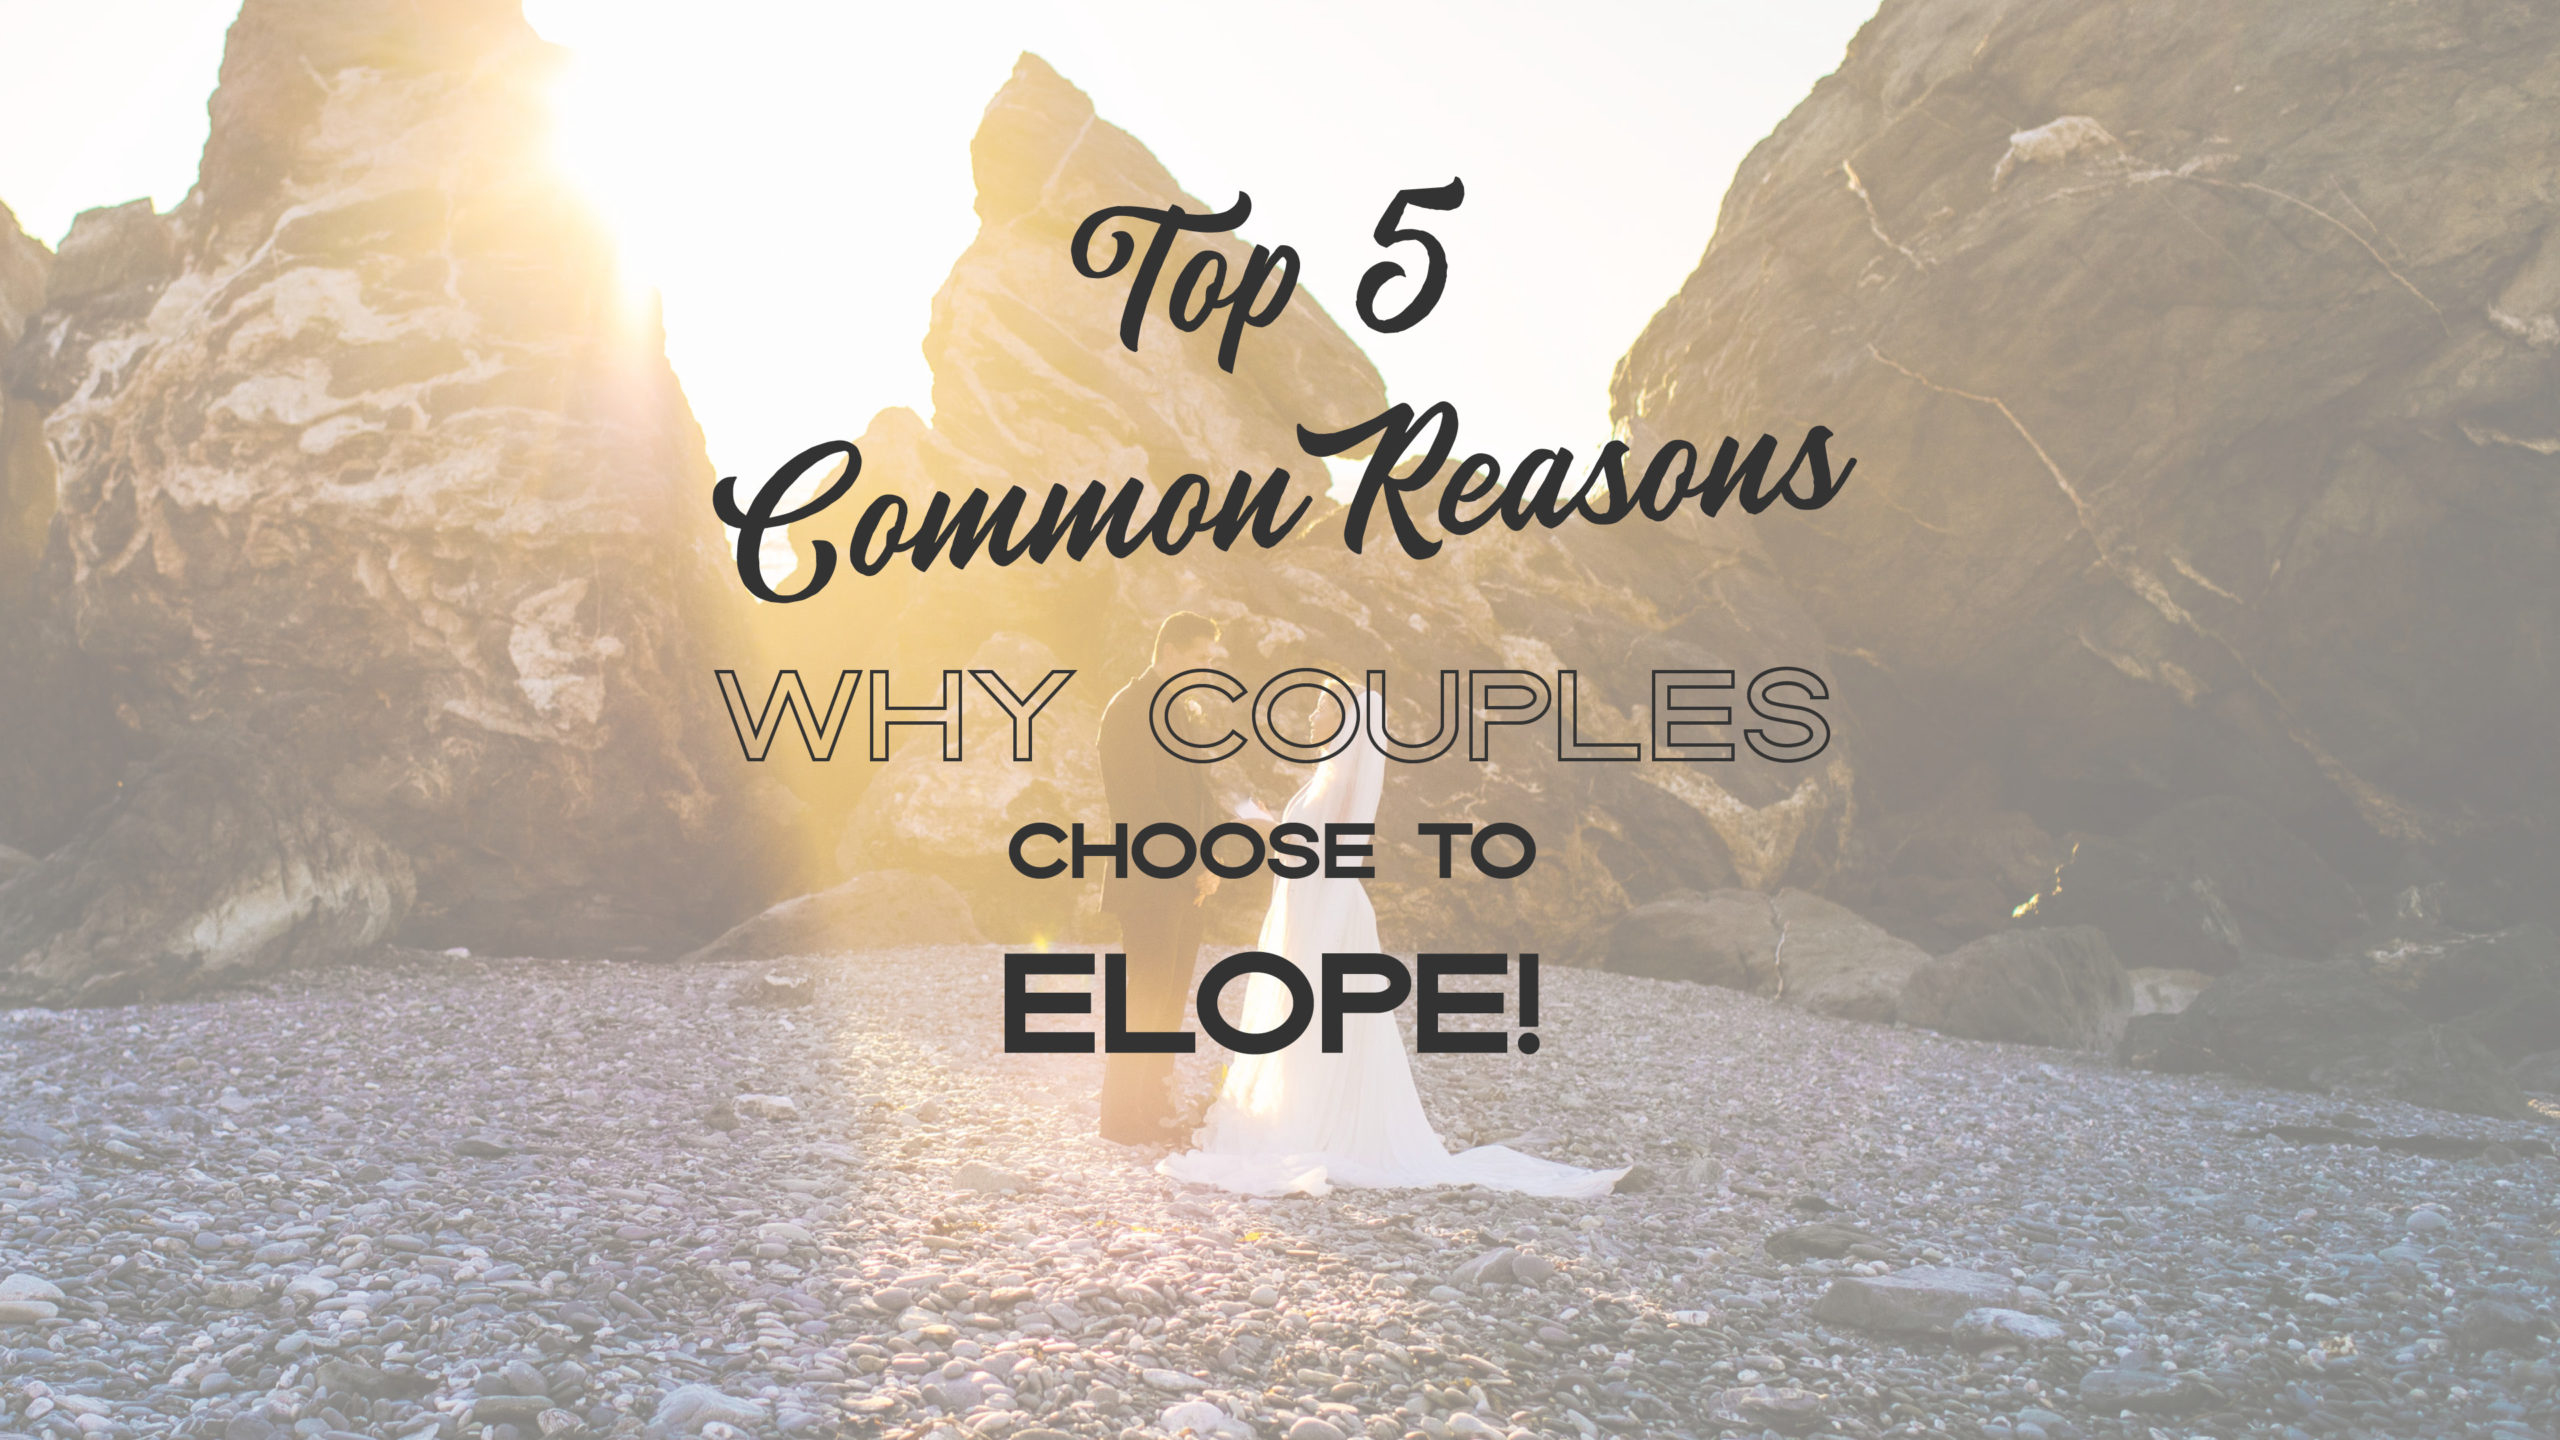 Top-5-reasons-scaled Benefits of Eloping: 5 Reasons Why You Should Elope